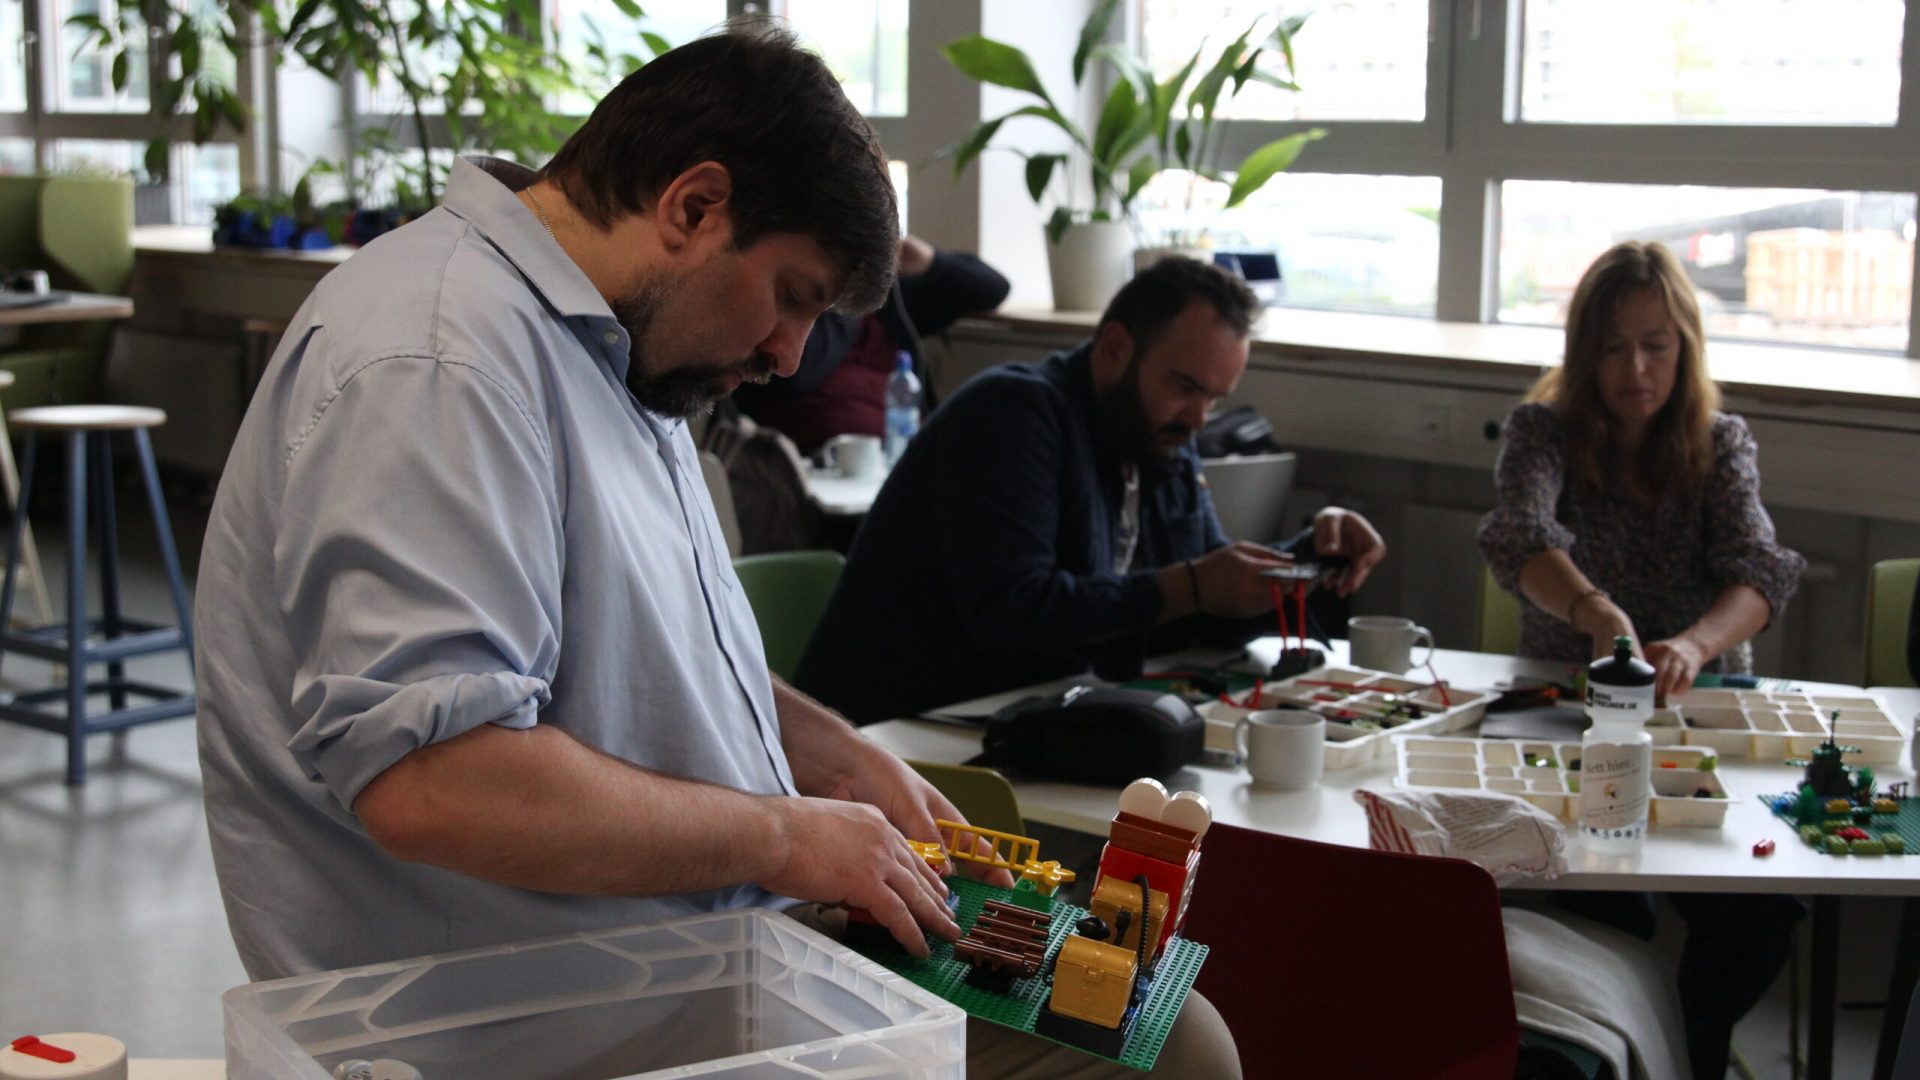 Creating the prototype of a Third Place using Lego.  Photo credits: SciCultureD (funded by Erasmus+)